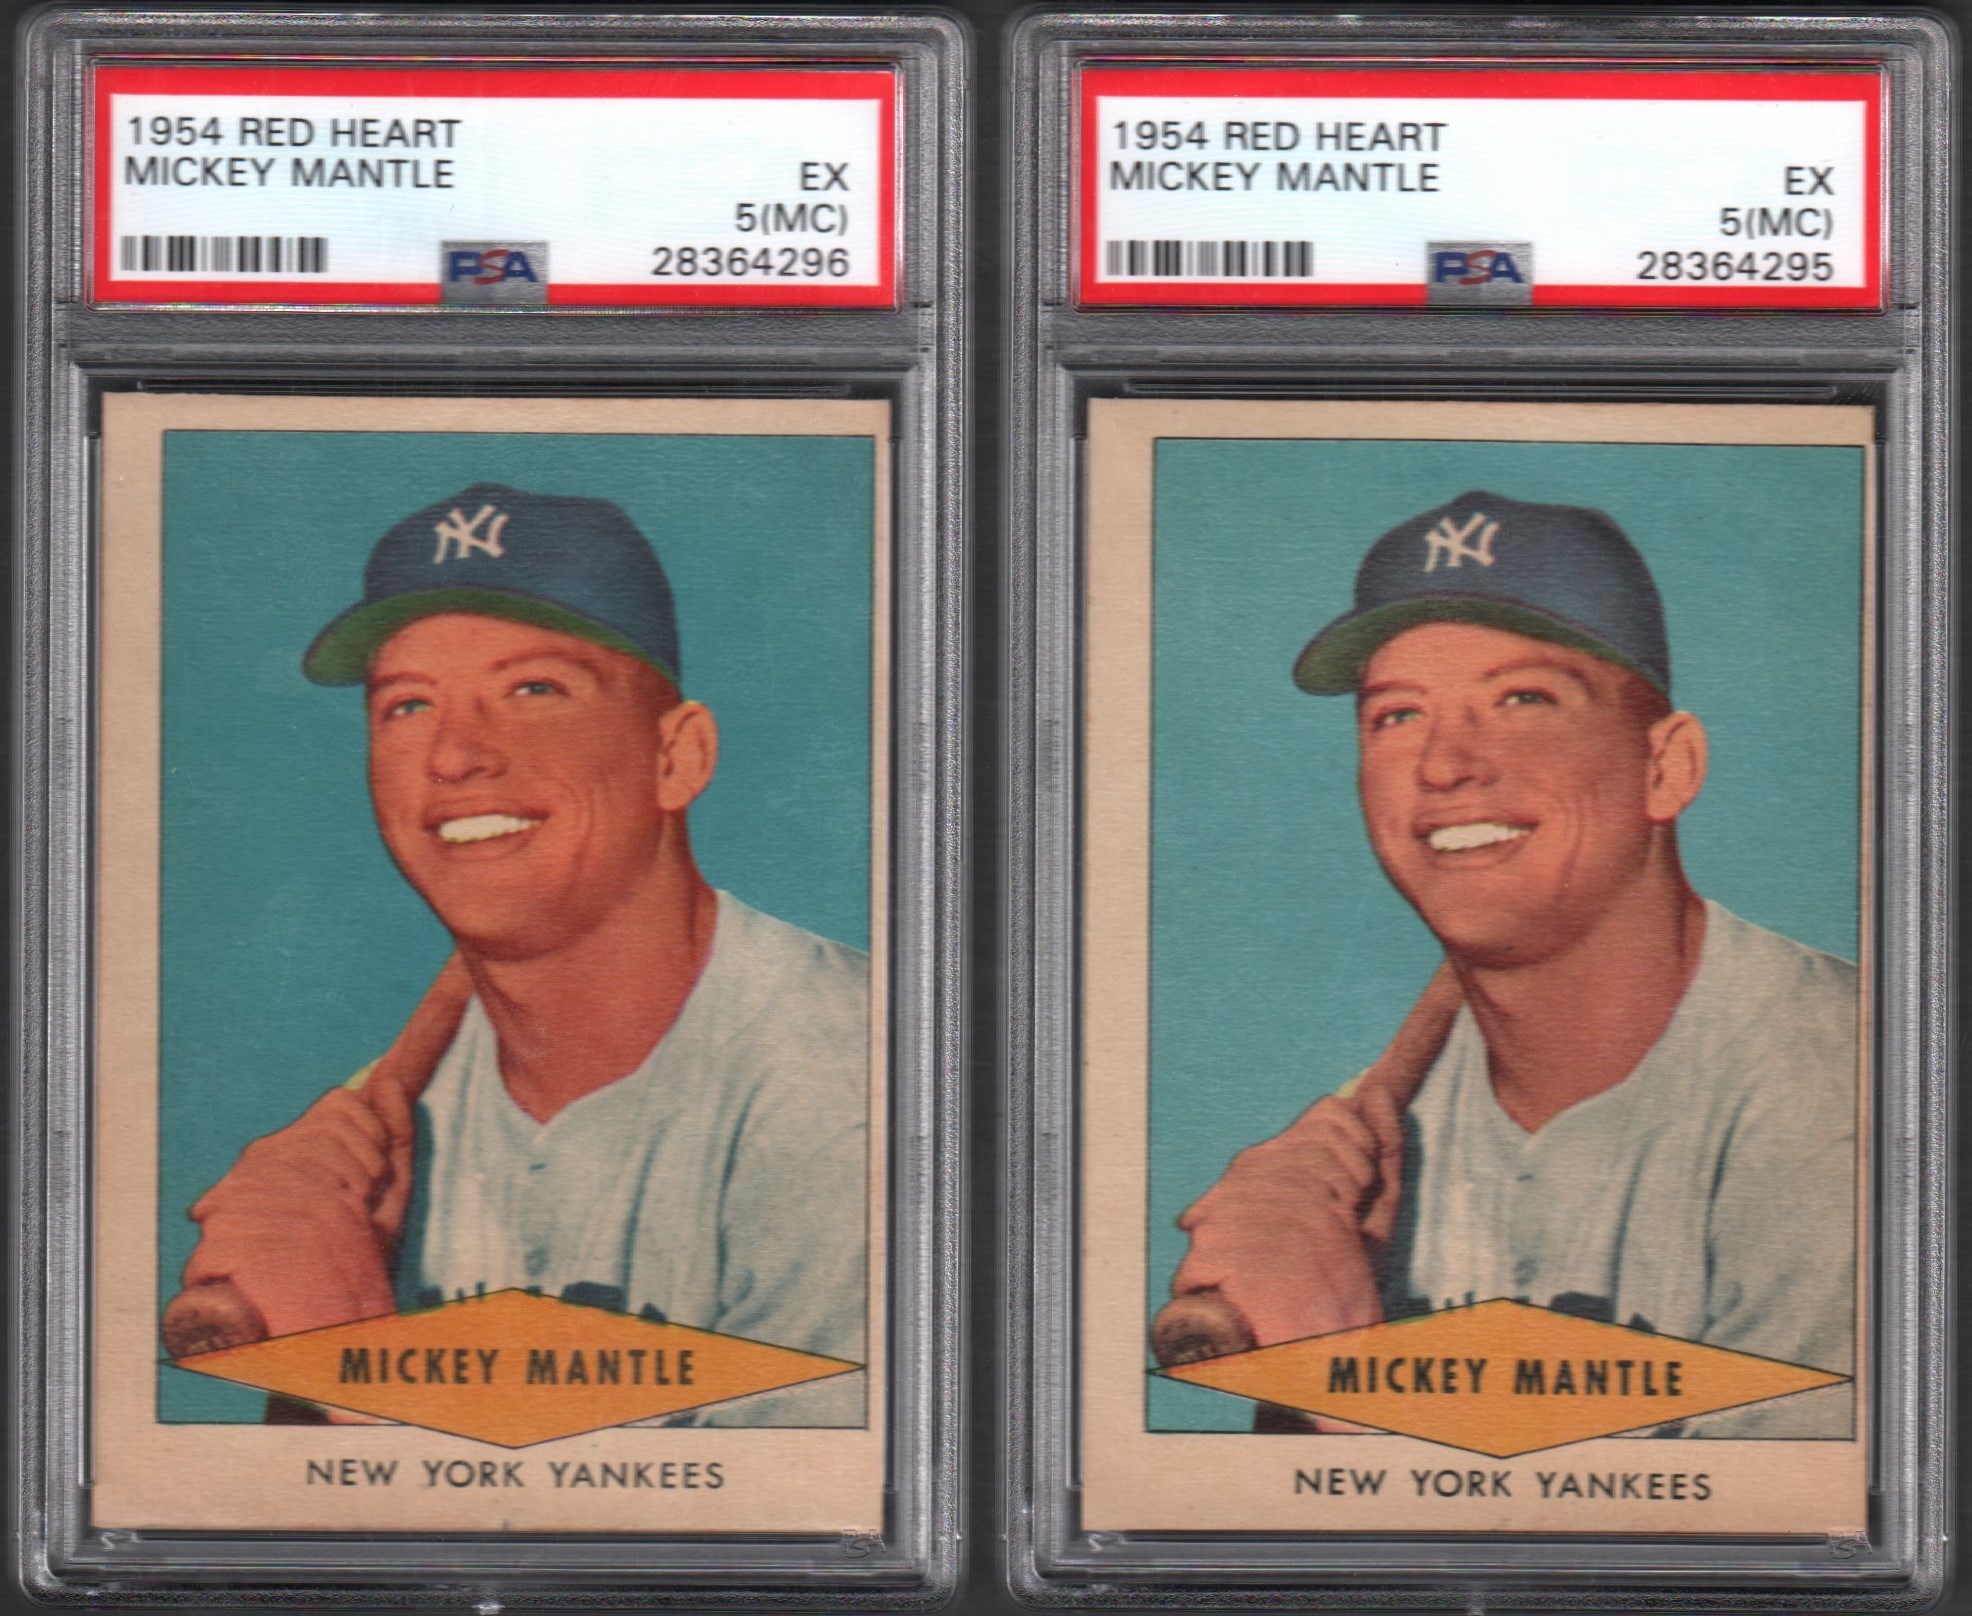 - 1954 Red Heart Mickey Mantle Pair of Cards